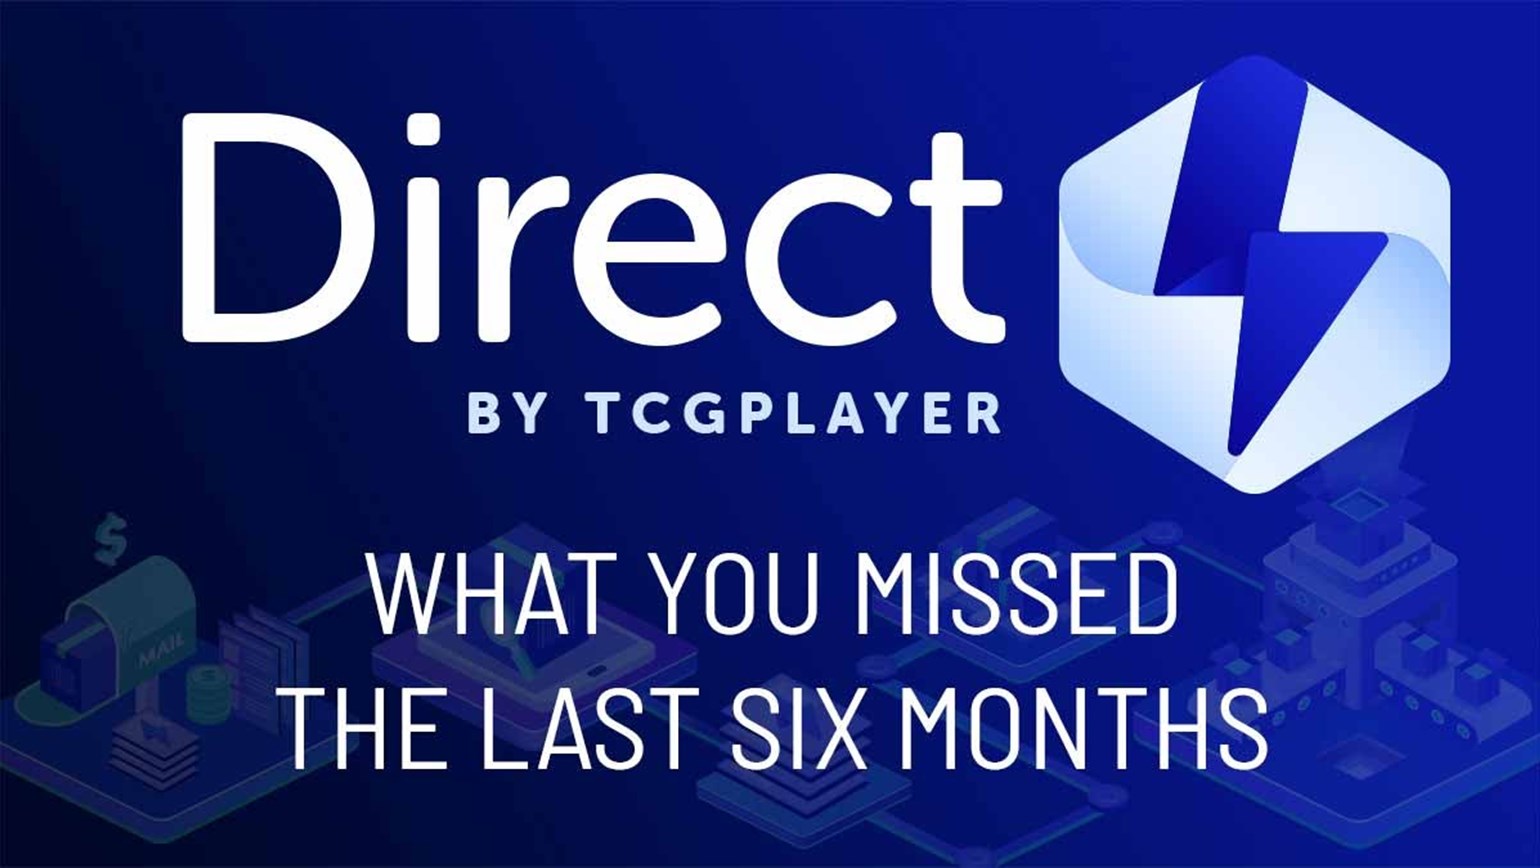 Direct by TCGplayer: What You Missed The Last Six Months